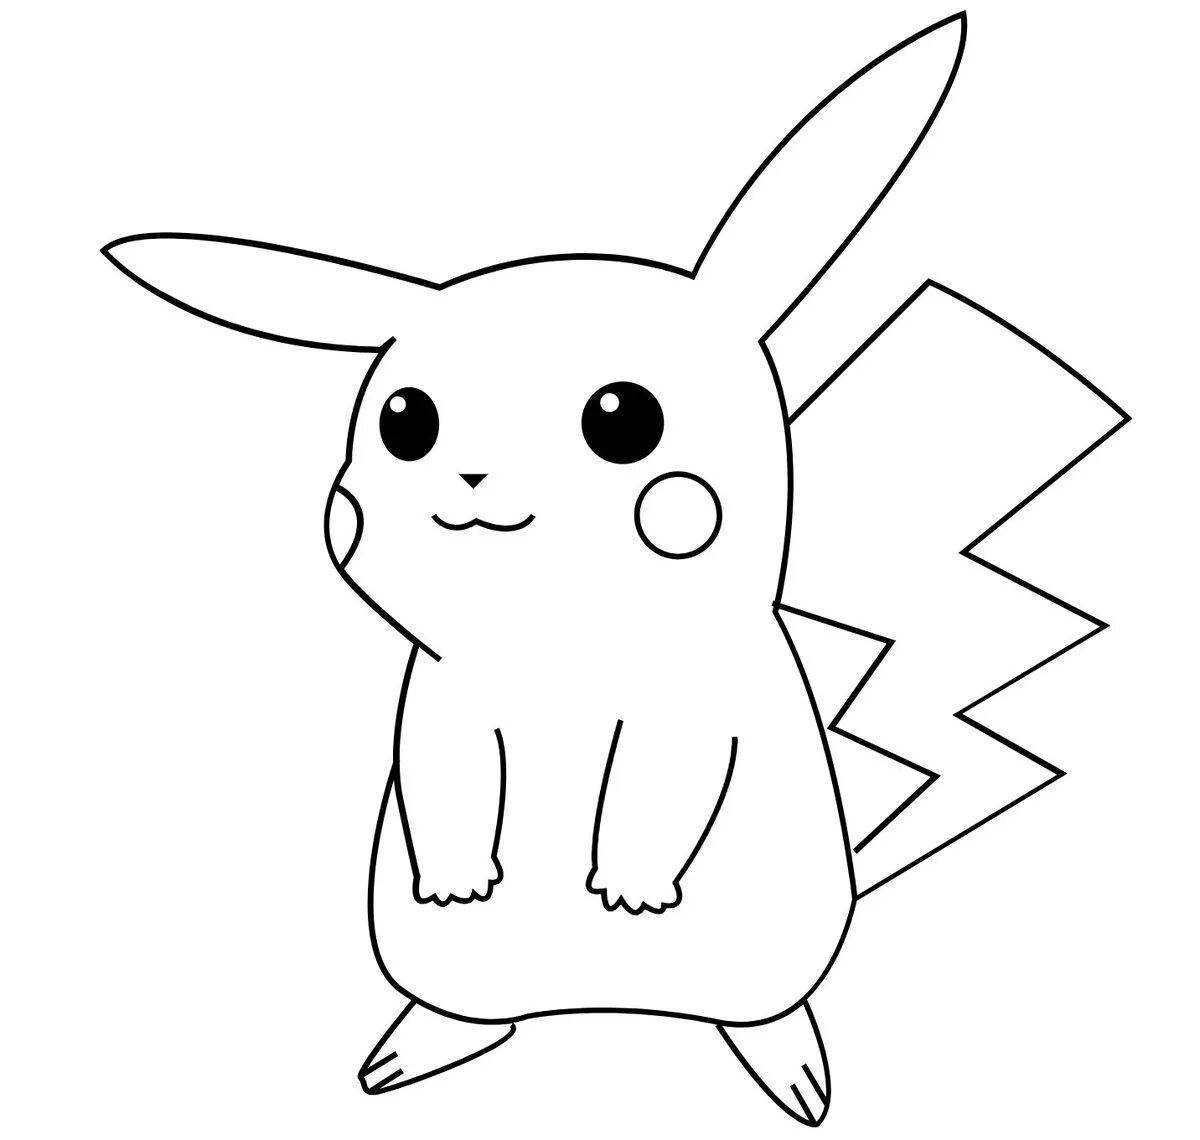 Exquisite pikachu christmas coloring book